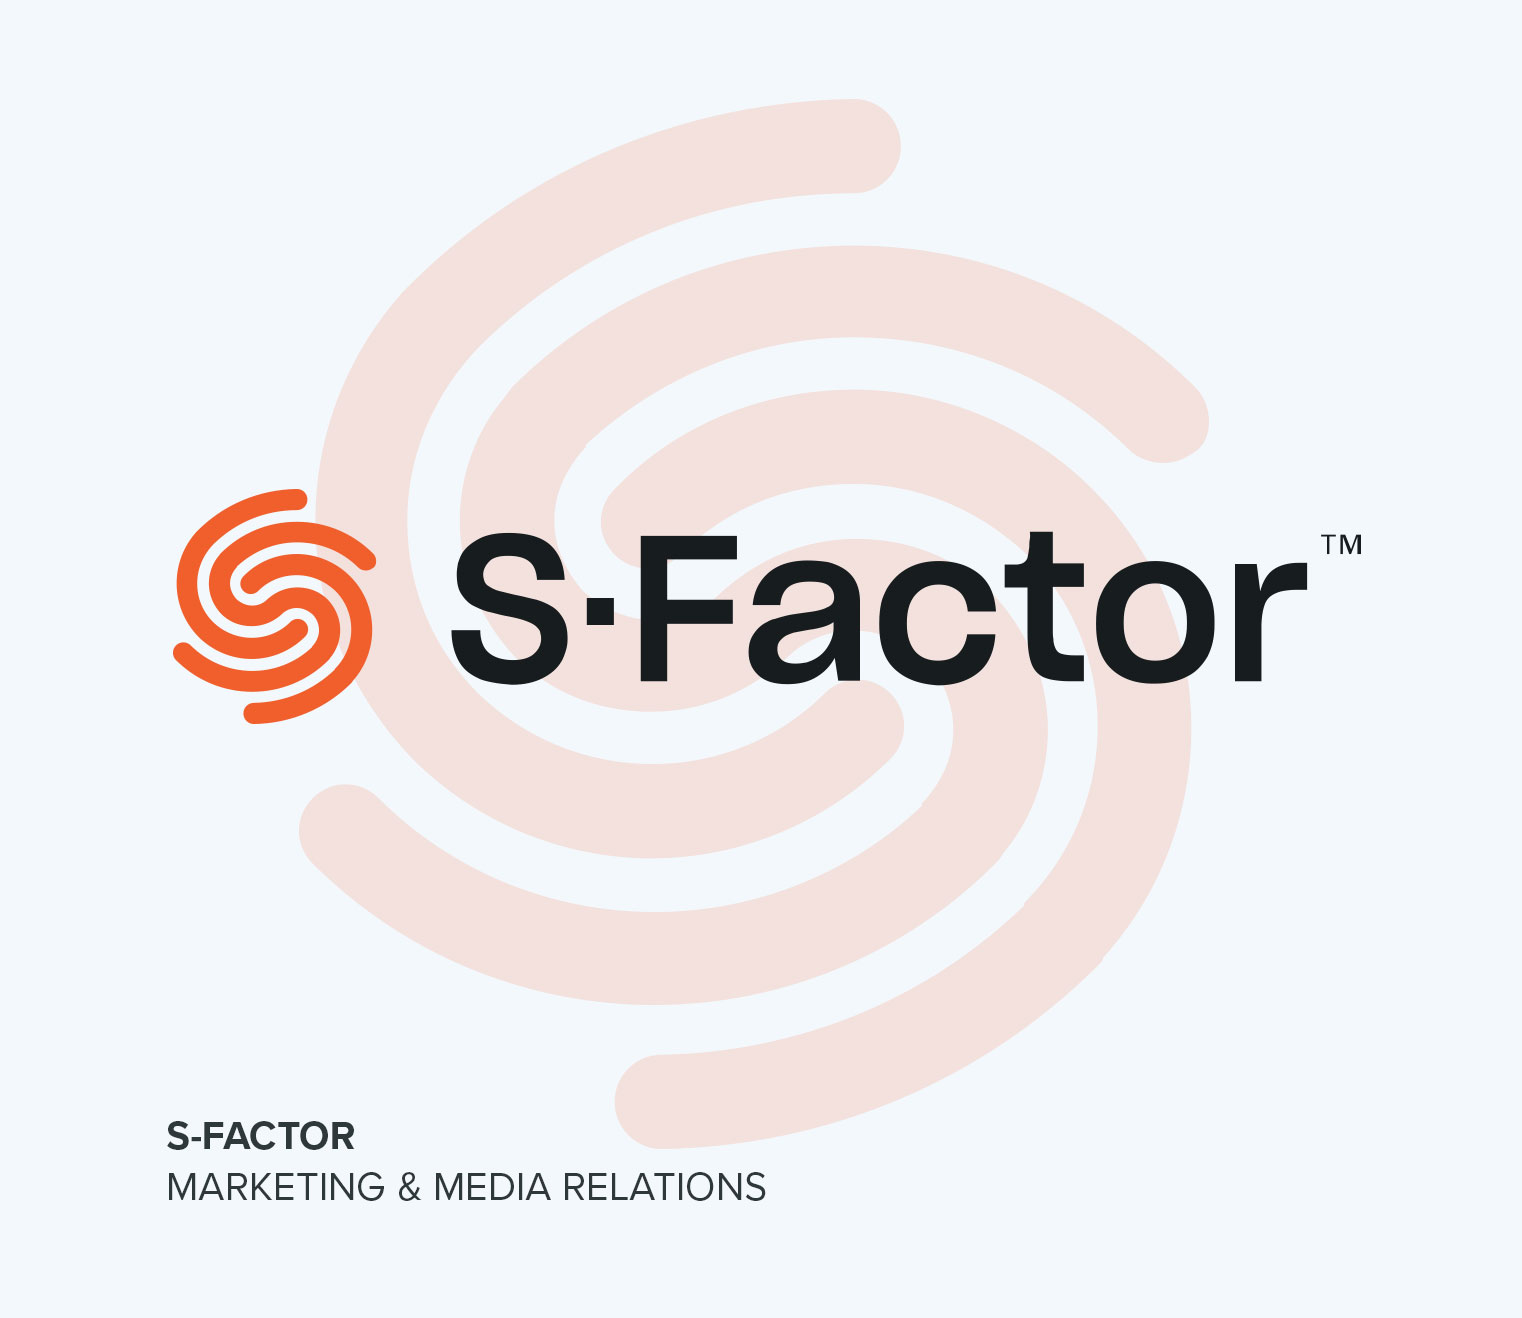 Case Study cover page for S-Factor Marketing & Media relations.